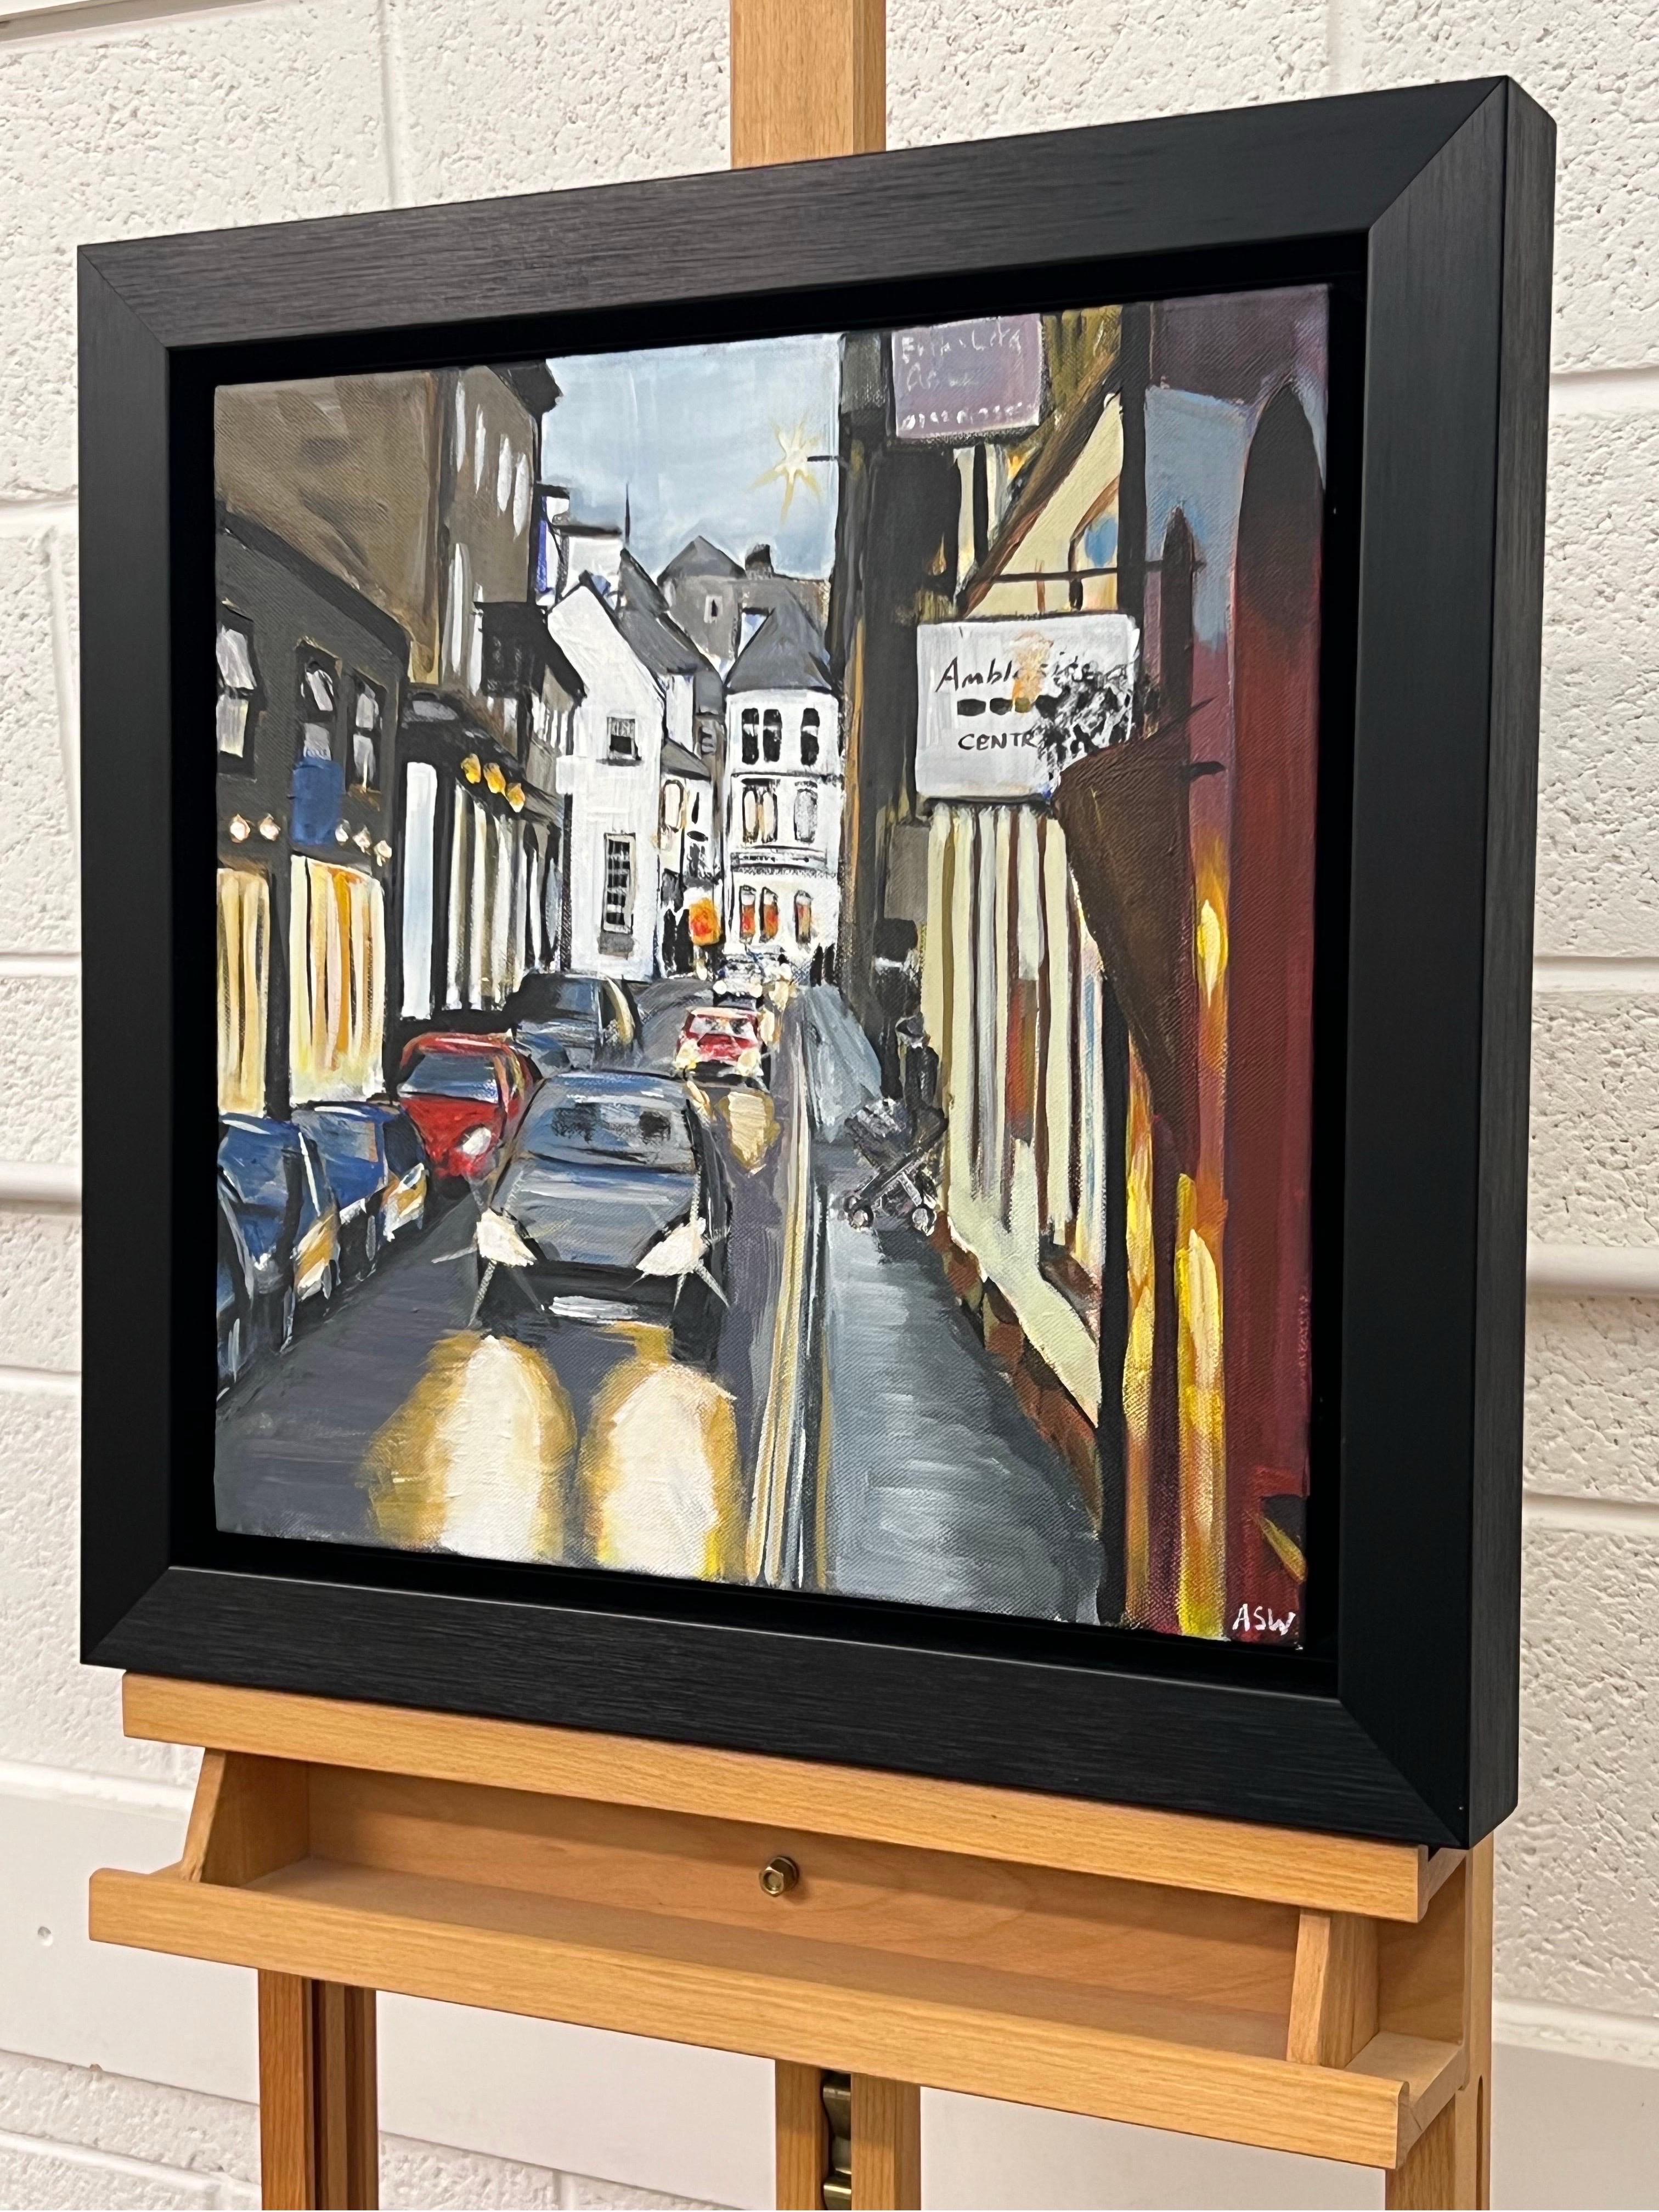 Busy Street in Ambleside in the Lake District, England, by Contemporary British Urban Landscape Artist, Angela Wakefield 

Art measures 16 x 16 inches
Frame measures 21 x 21 inches 

Angela Wakefield has twice been on the front cover of ‘Art of